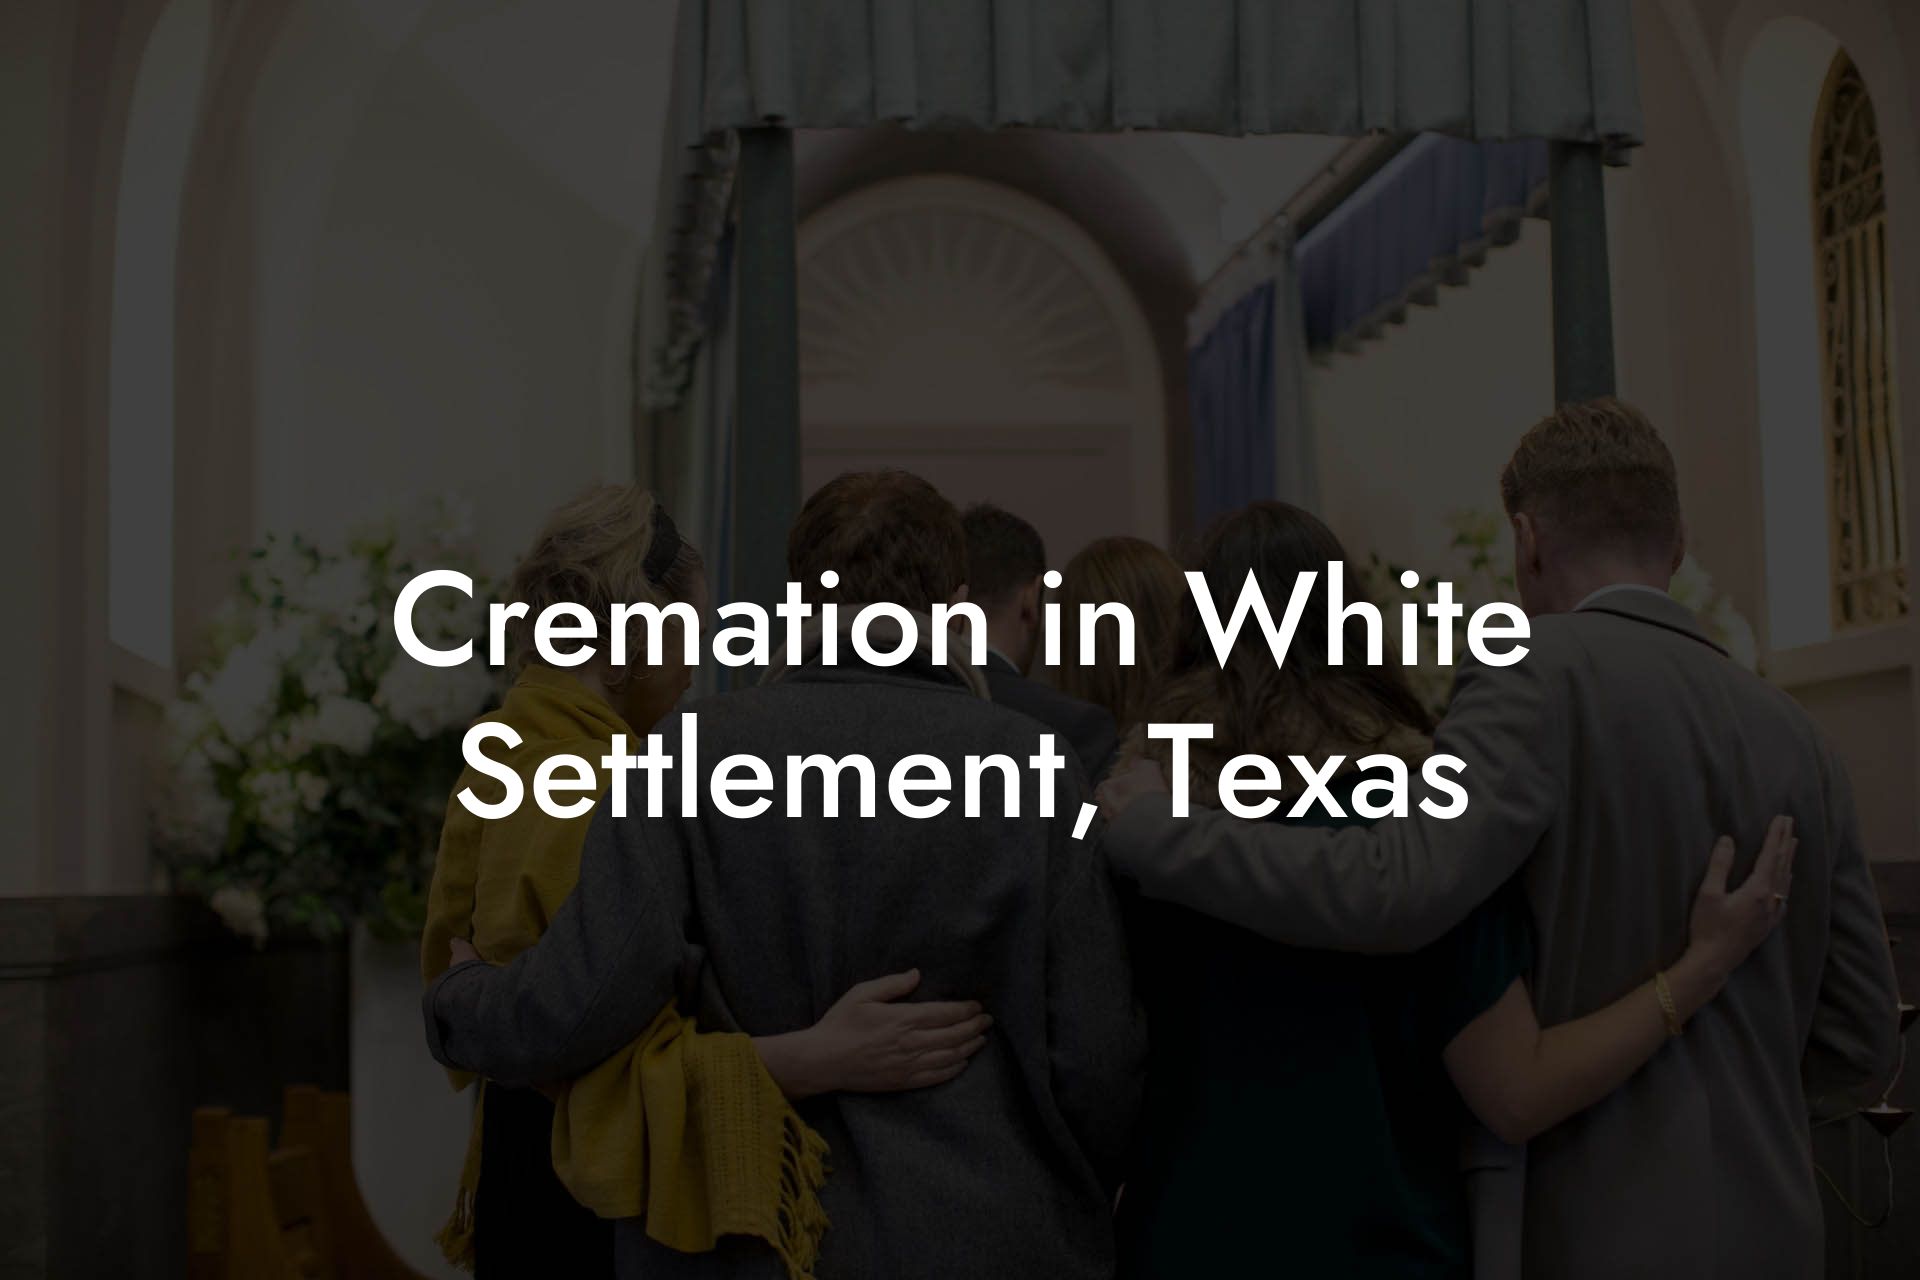 Cremation in White Settlement, Texas